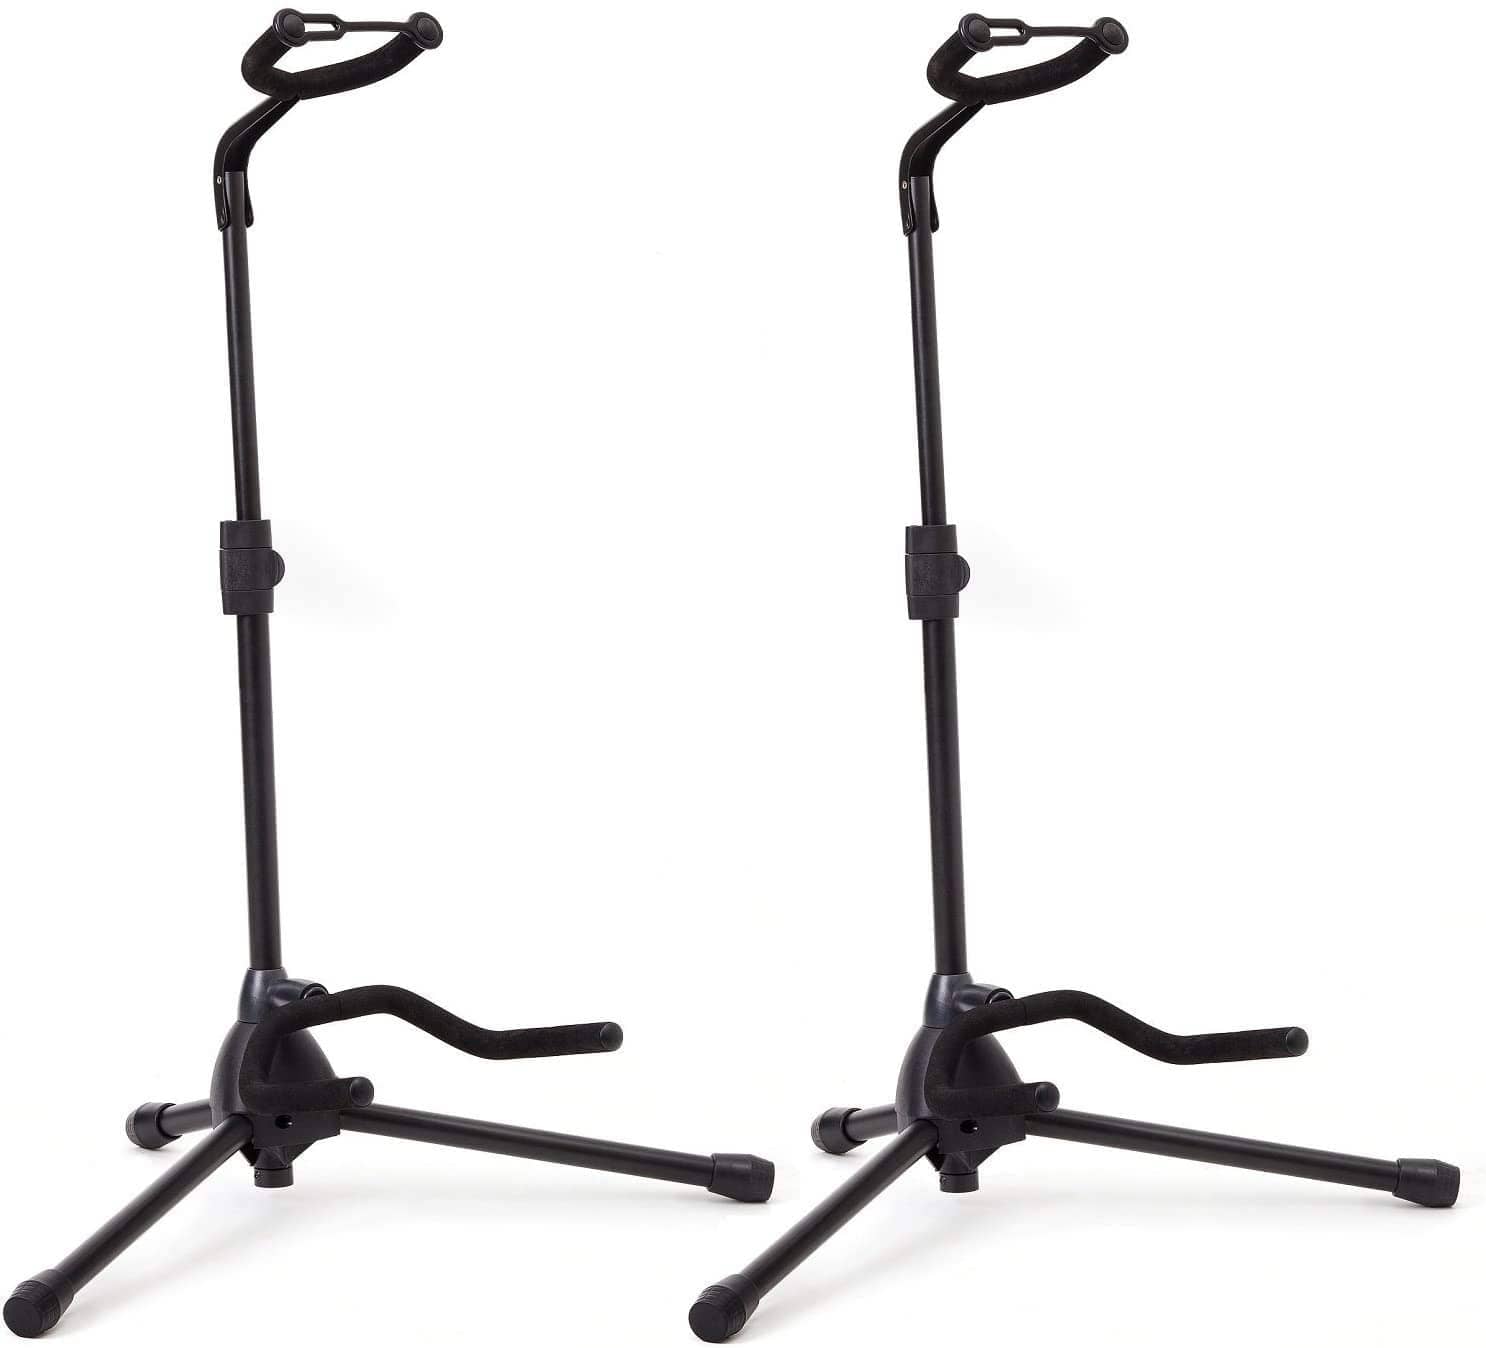 Pack of 2 – Universal Guitar Stand by Hola! Music – Fits Acoustic, Classical, Electric, Bass Guitars, Mandolins, Banjos, Ukuleles and Other Stringed Instruments 15